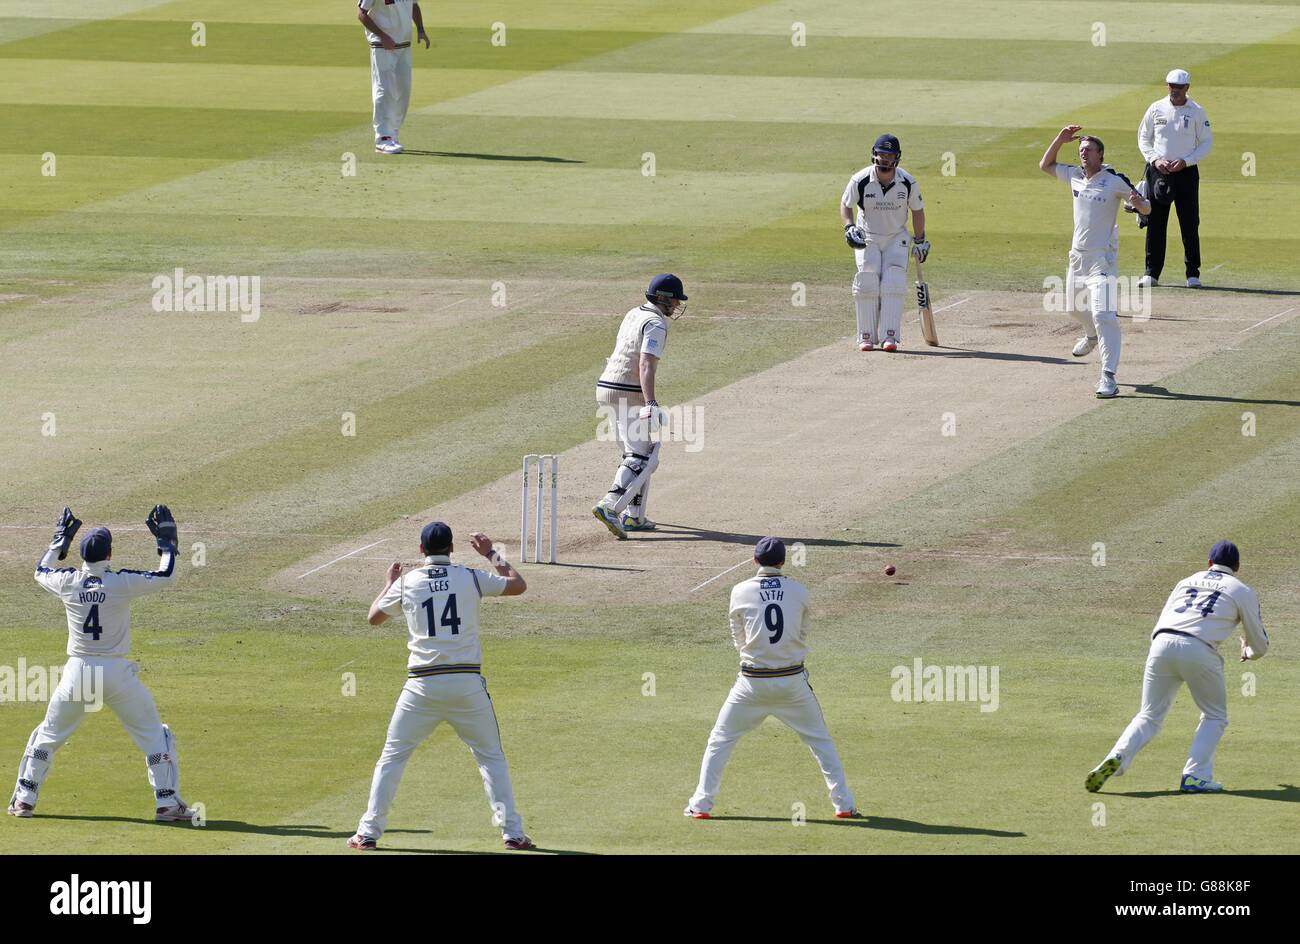 Yorkshire's Steven Patterson (centre, right) appeals in vain after bowling to Middlesex's Sam Robson during day two of the LV= County Championship Division One match at Lord's Cricket Ground, London. Picture date: Thursday September 10, 2015. See PA story CRICKET Middlesex. Photo credit should read: Jed Leicester/PA Wire. RESTRICTIONS: . No commercial use without prior written consent of the ECB. Still image use only - no moving images to emulate broadcast. No removing or obscuring of sponsor logos. Call +44 (0)1158 447447 for further information. Stock Photo